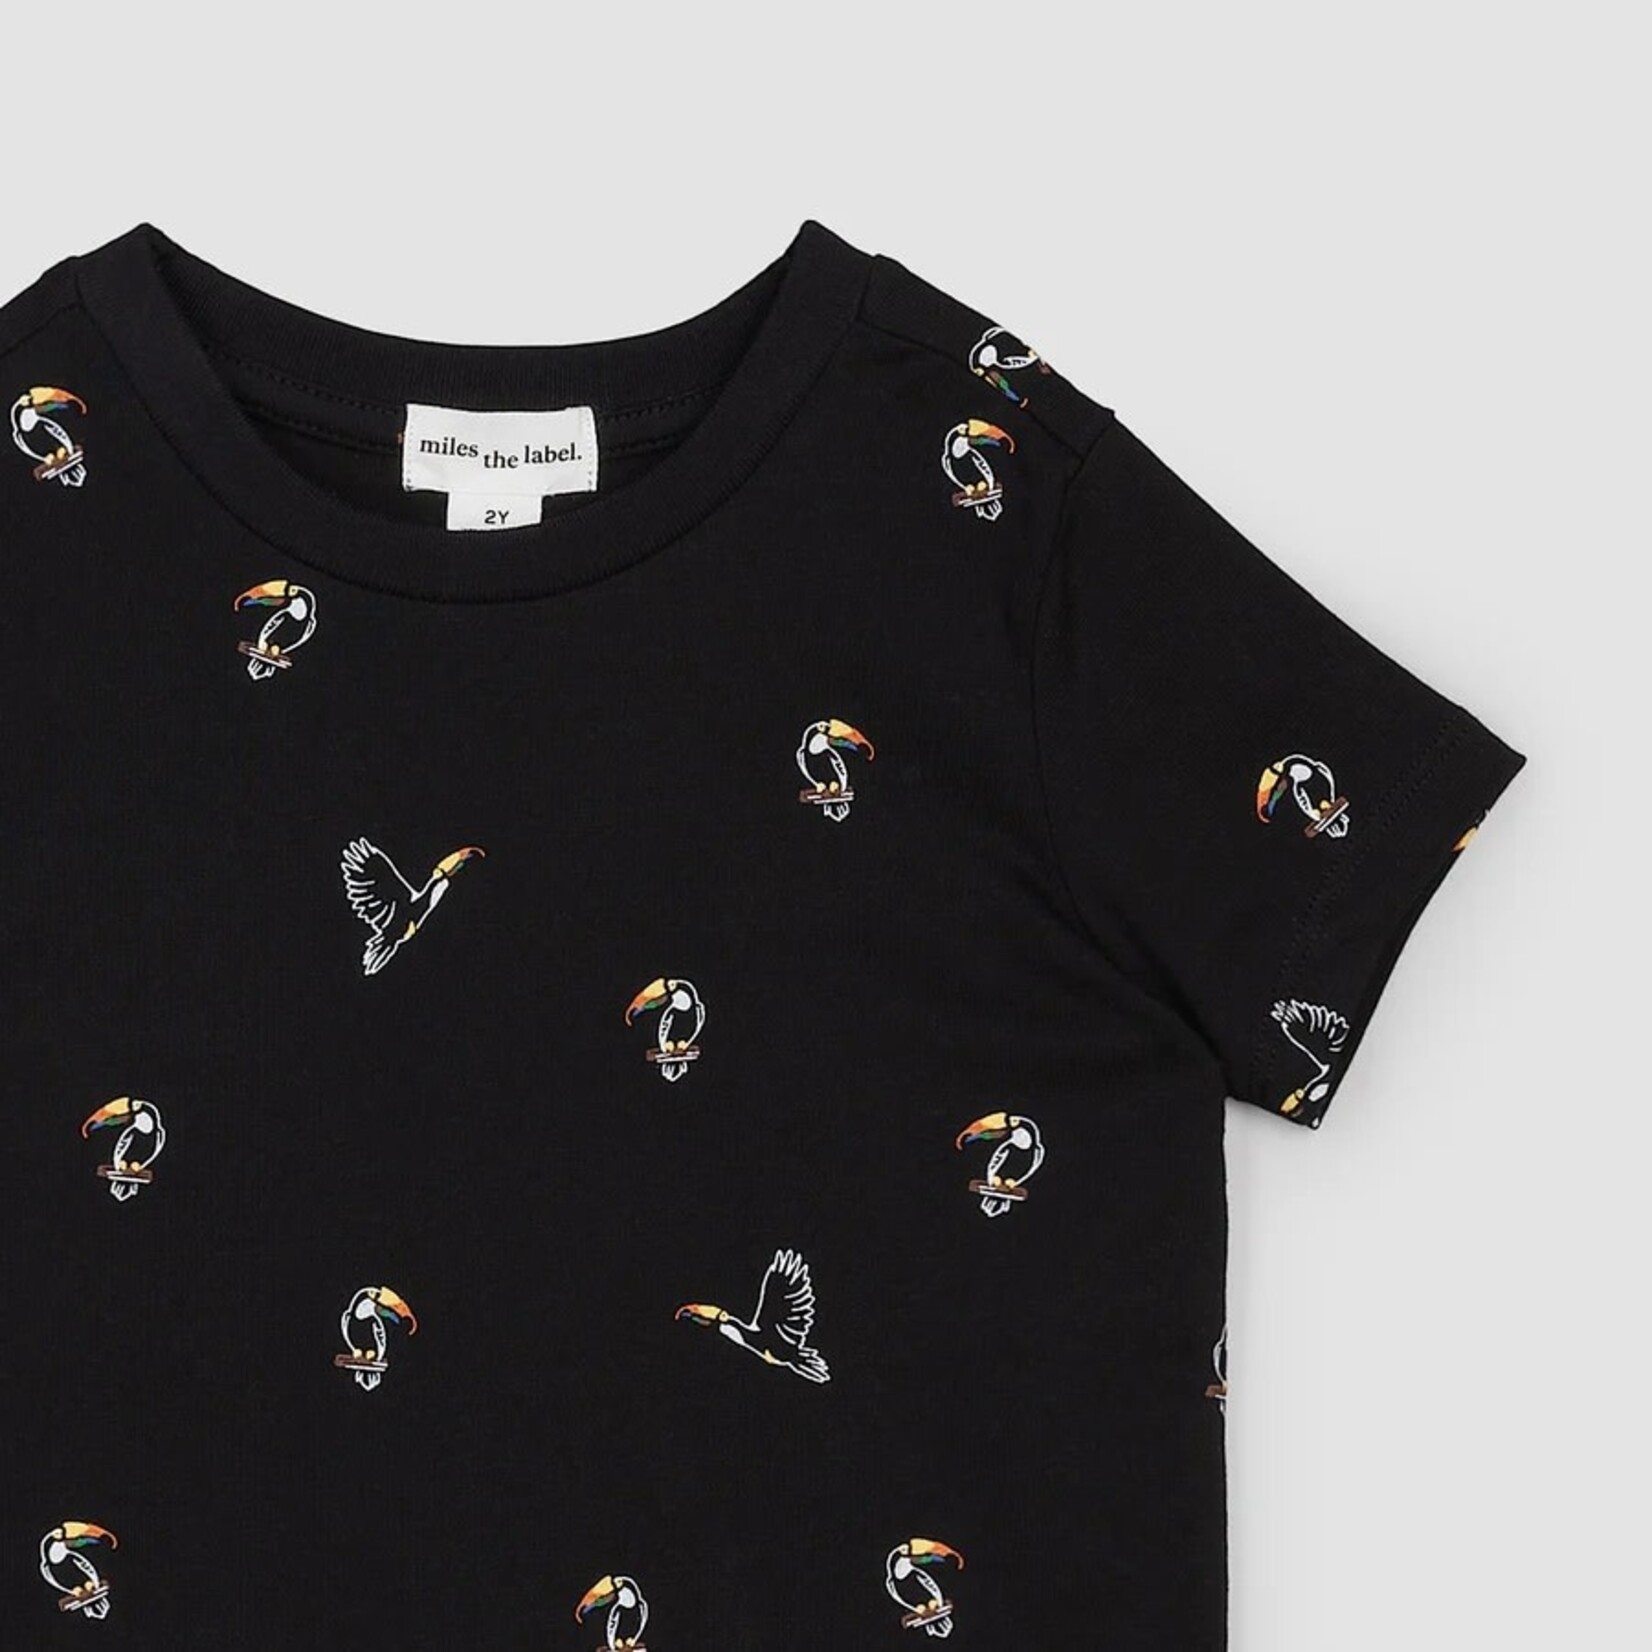 Miles the label MILES THE LABEL - Black short-sleeved t-shirt with toucan print